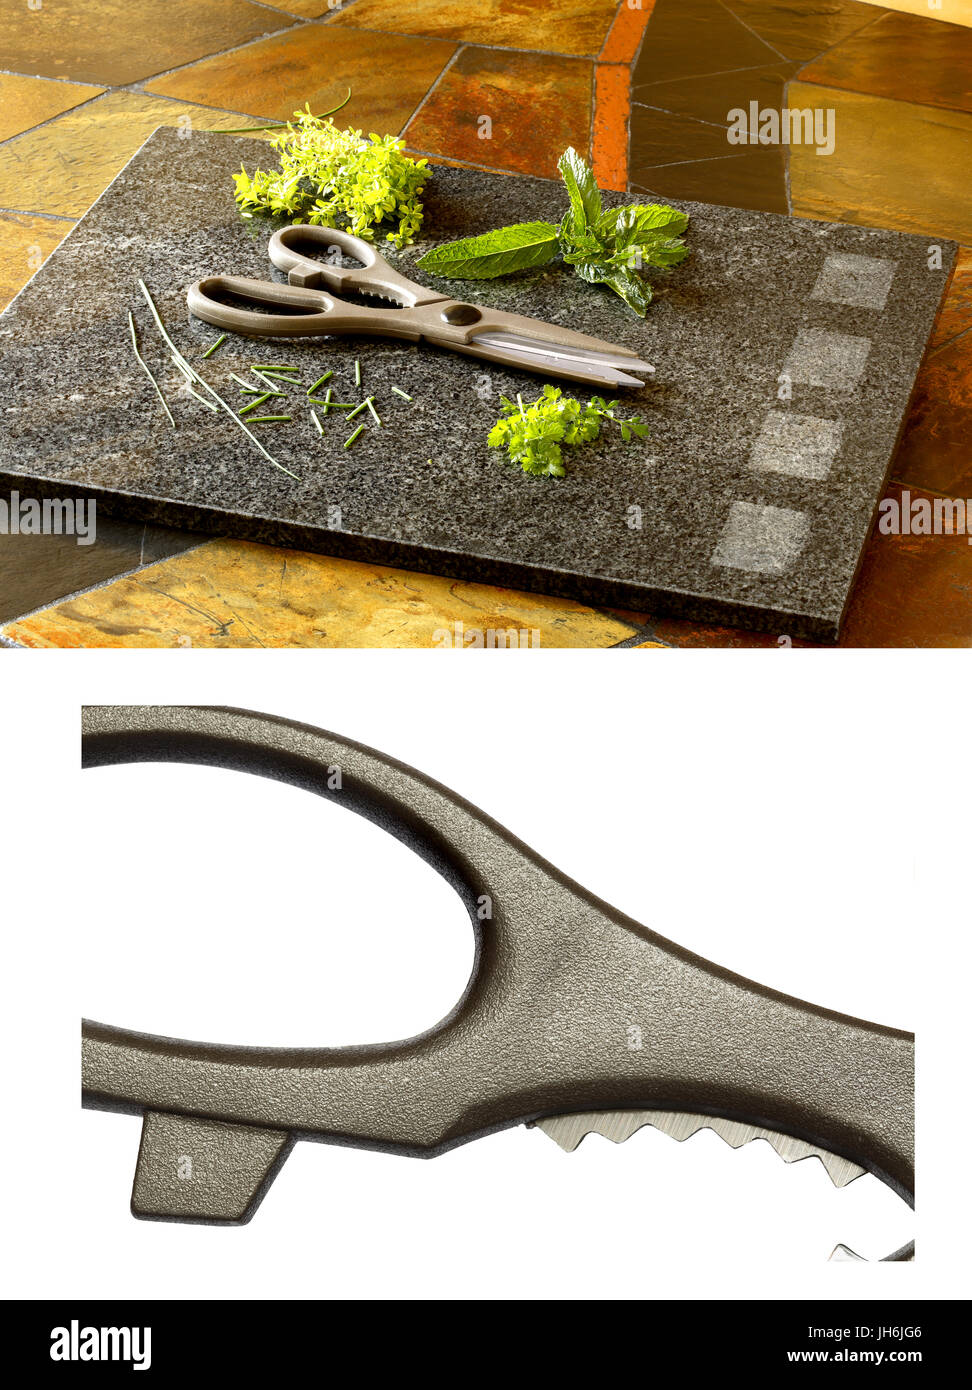 'Guess what it is' image of kitchen scissors with an explanation photo showing the scissors with herbs on a cutting board Stock Photo